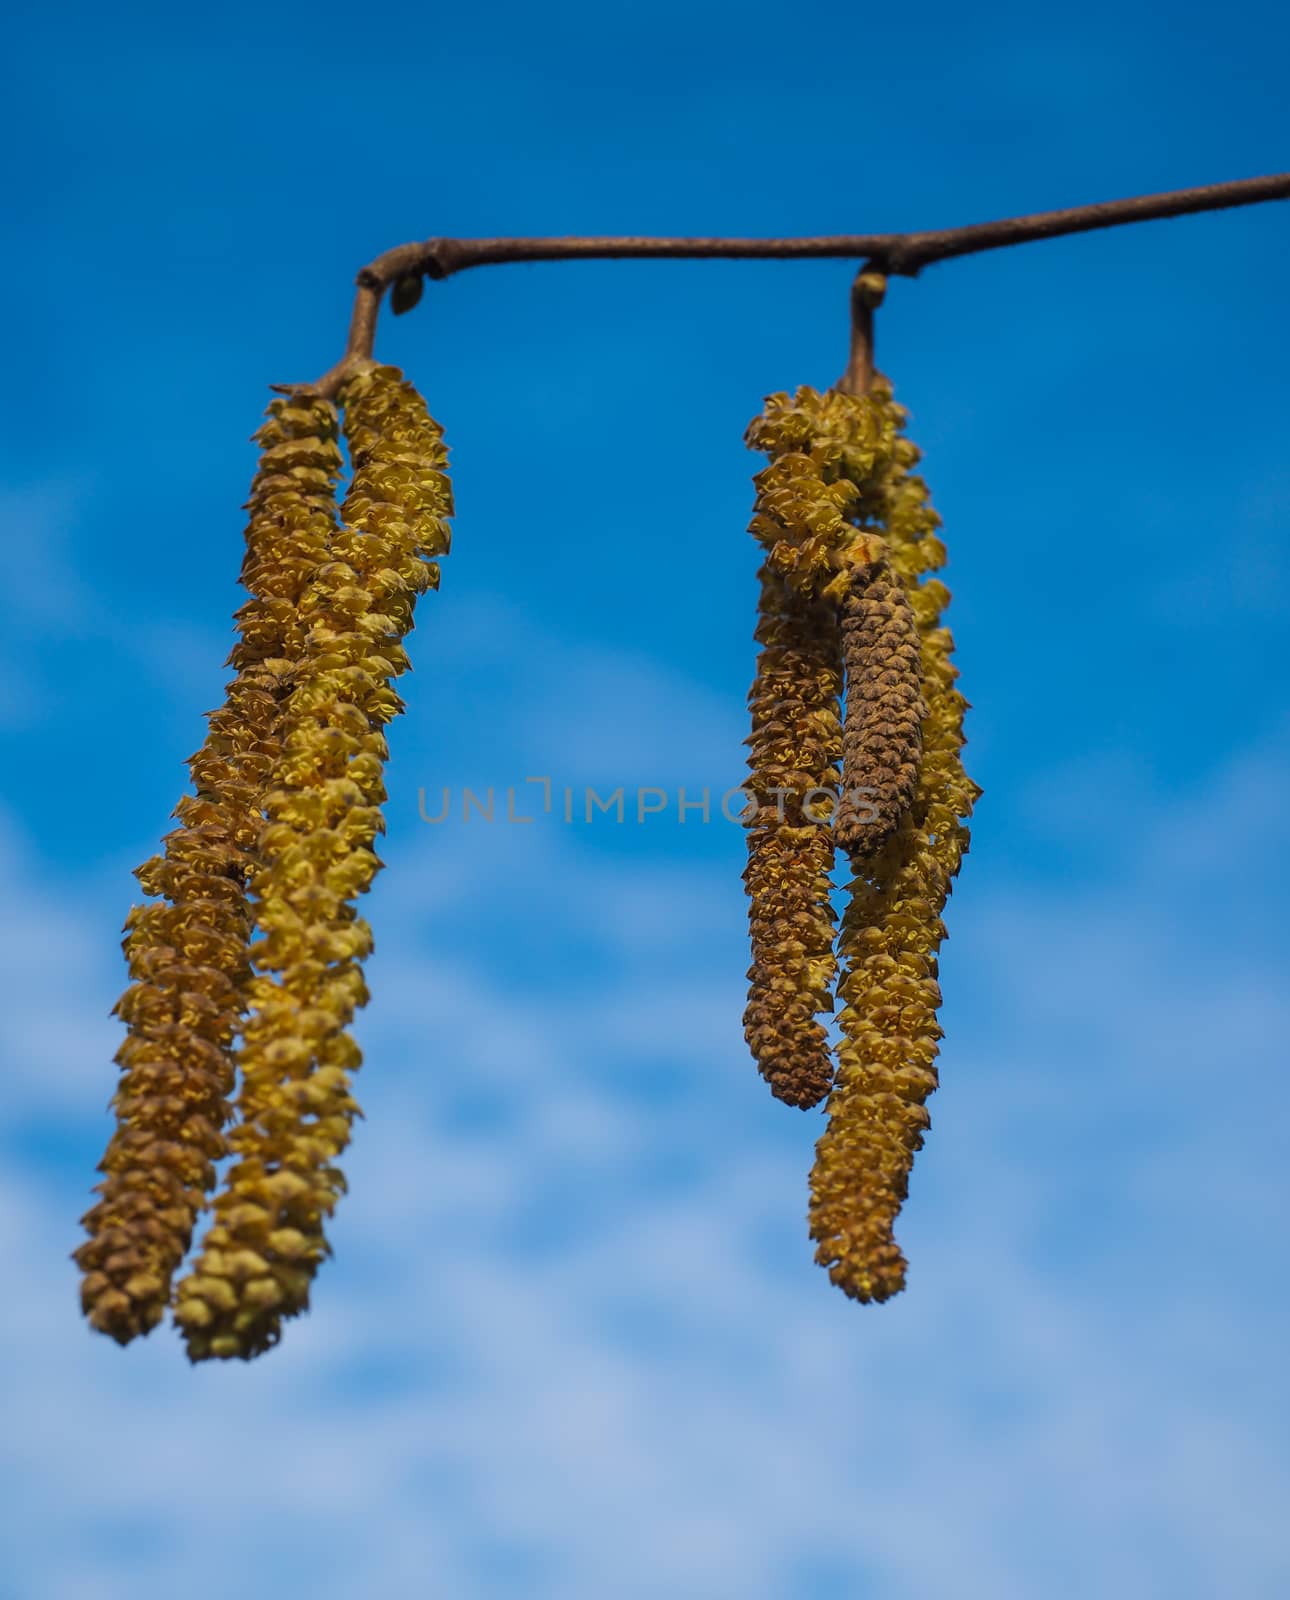 Seed buds from a birch tree hanging in front of blue sky at spring